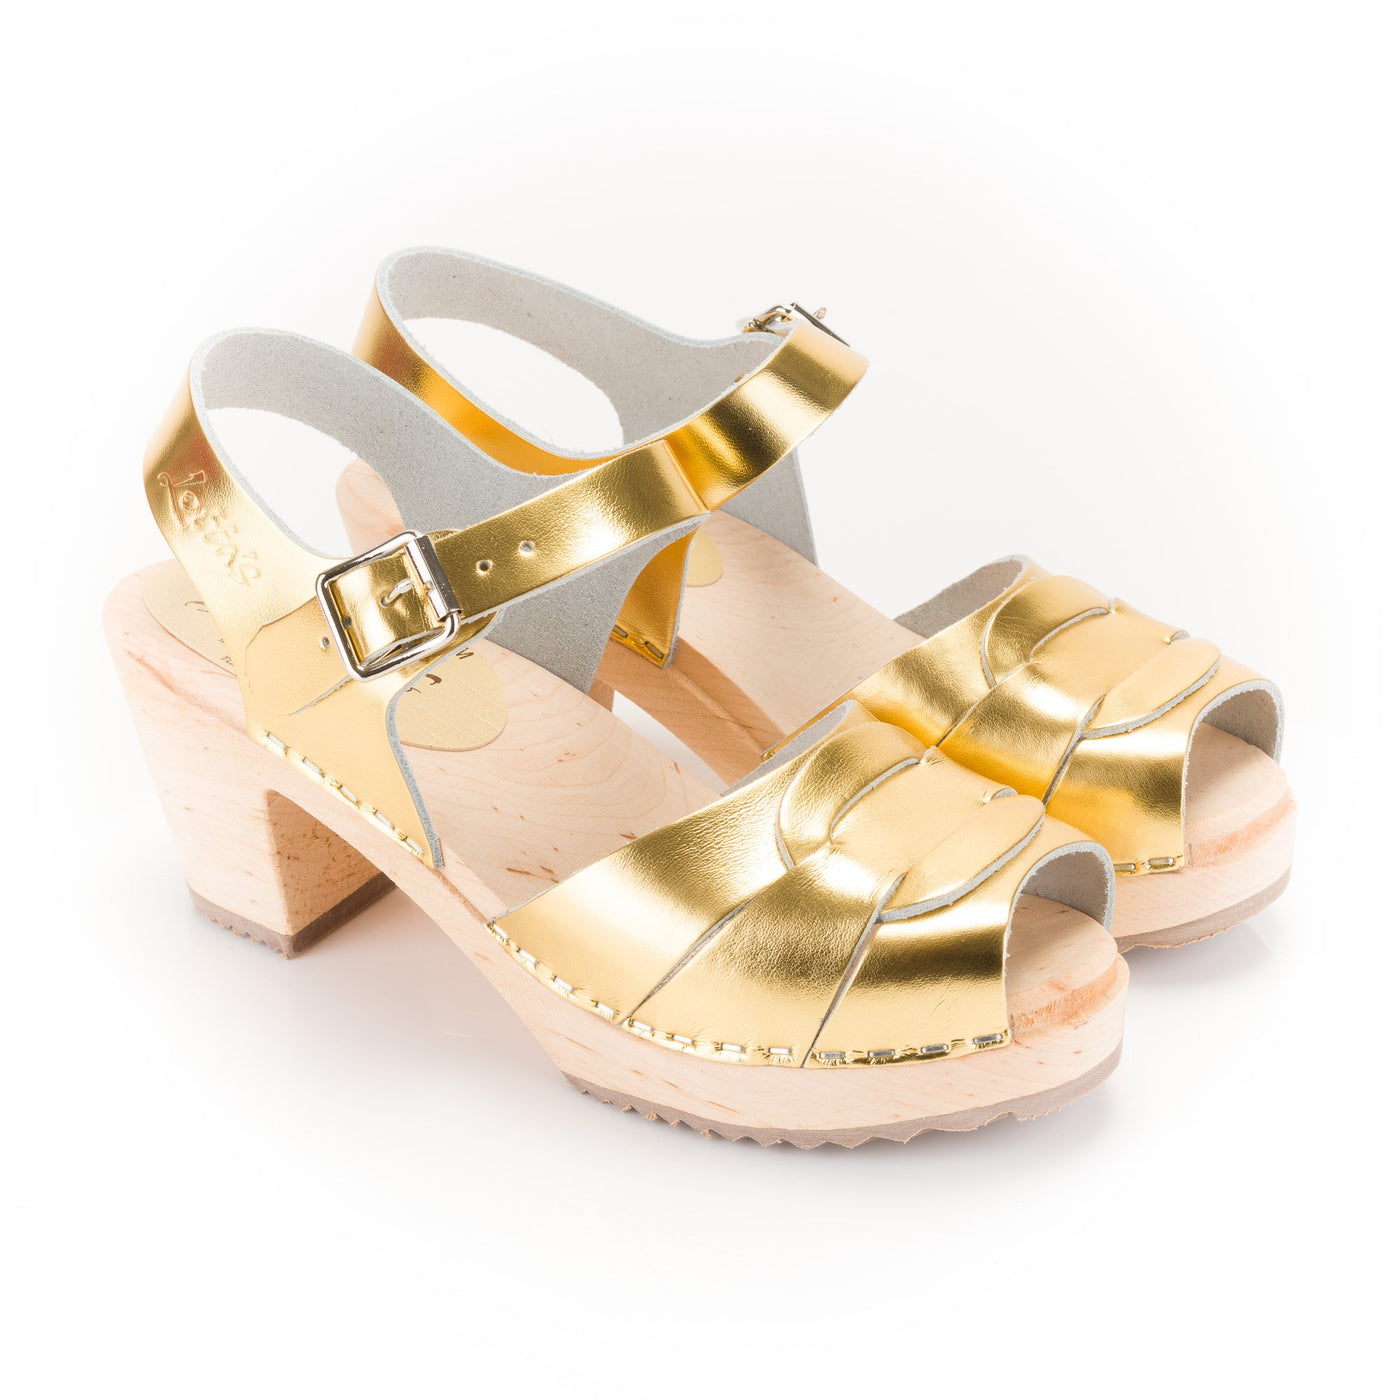 Metallic Gold Clogs by Lotta from Stockholm at Dollydagger